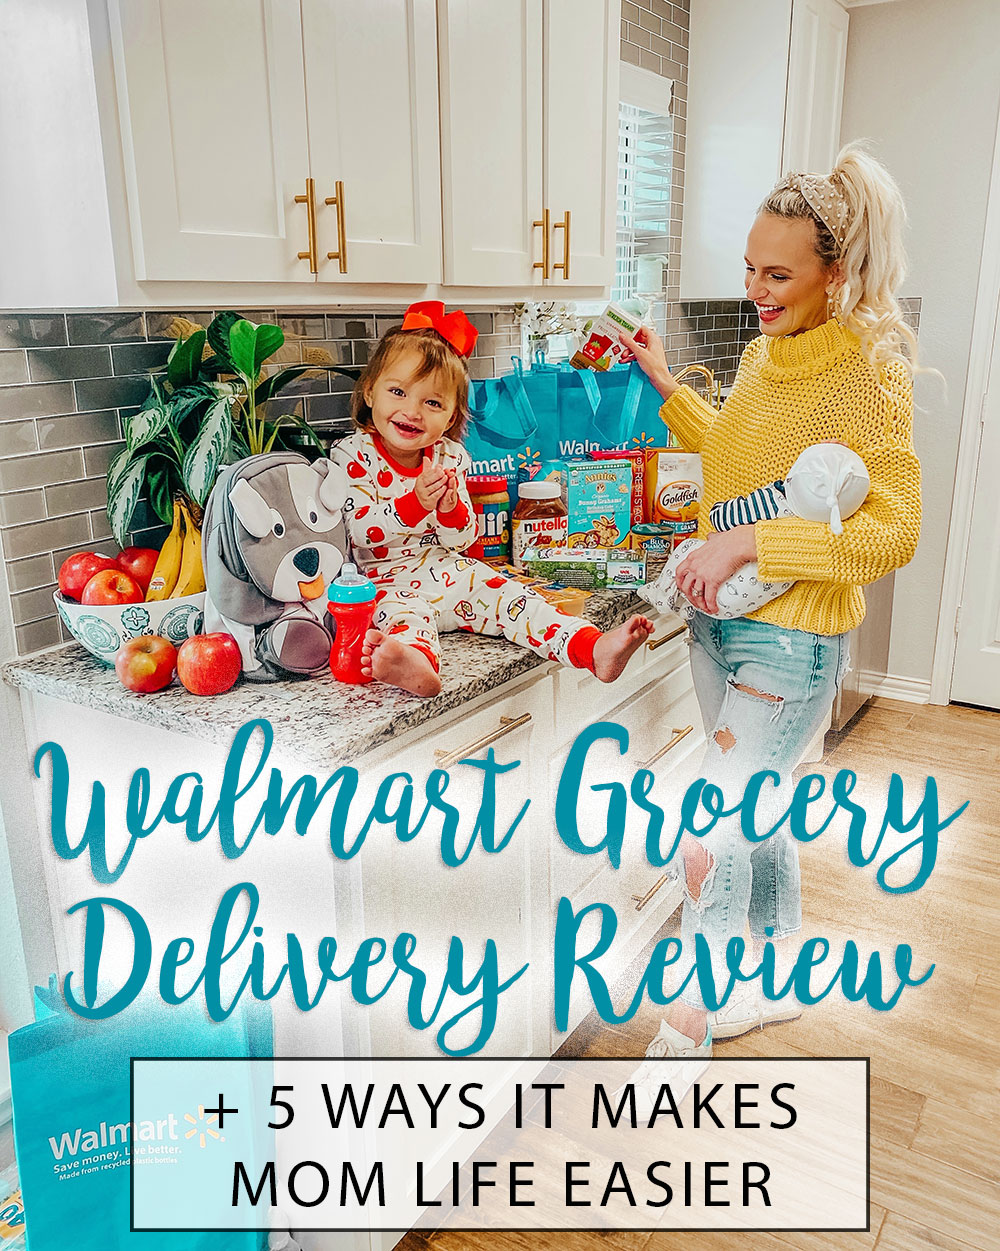 Review: I Went Grocery Shopping at Walmart for the First Time